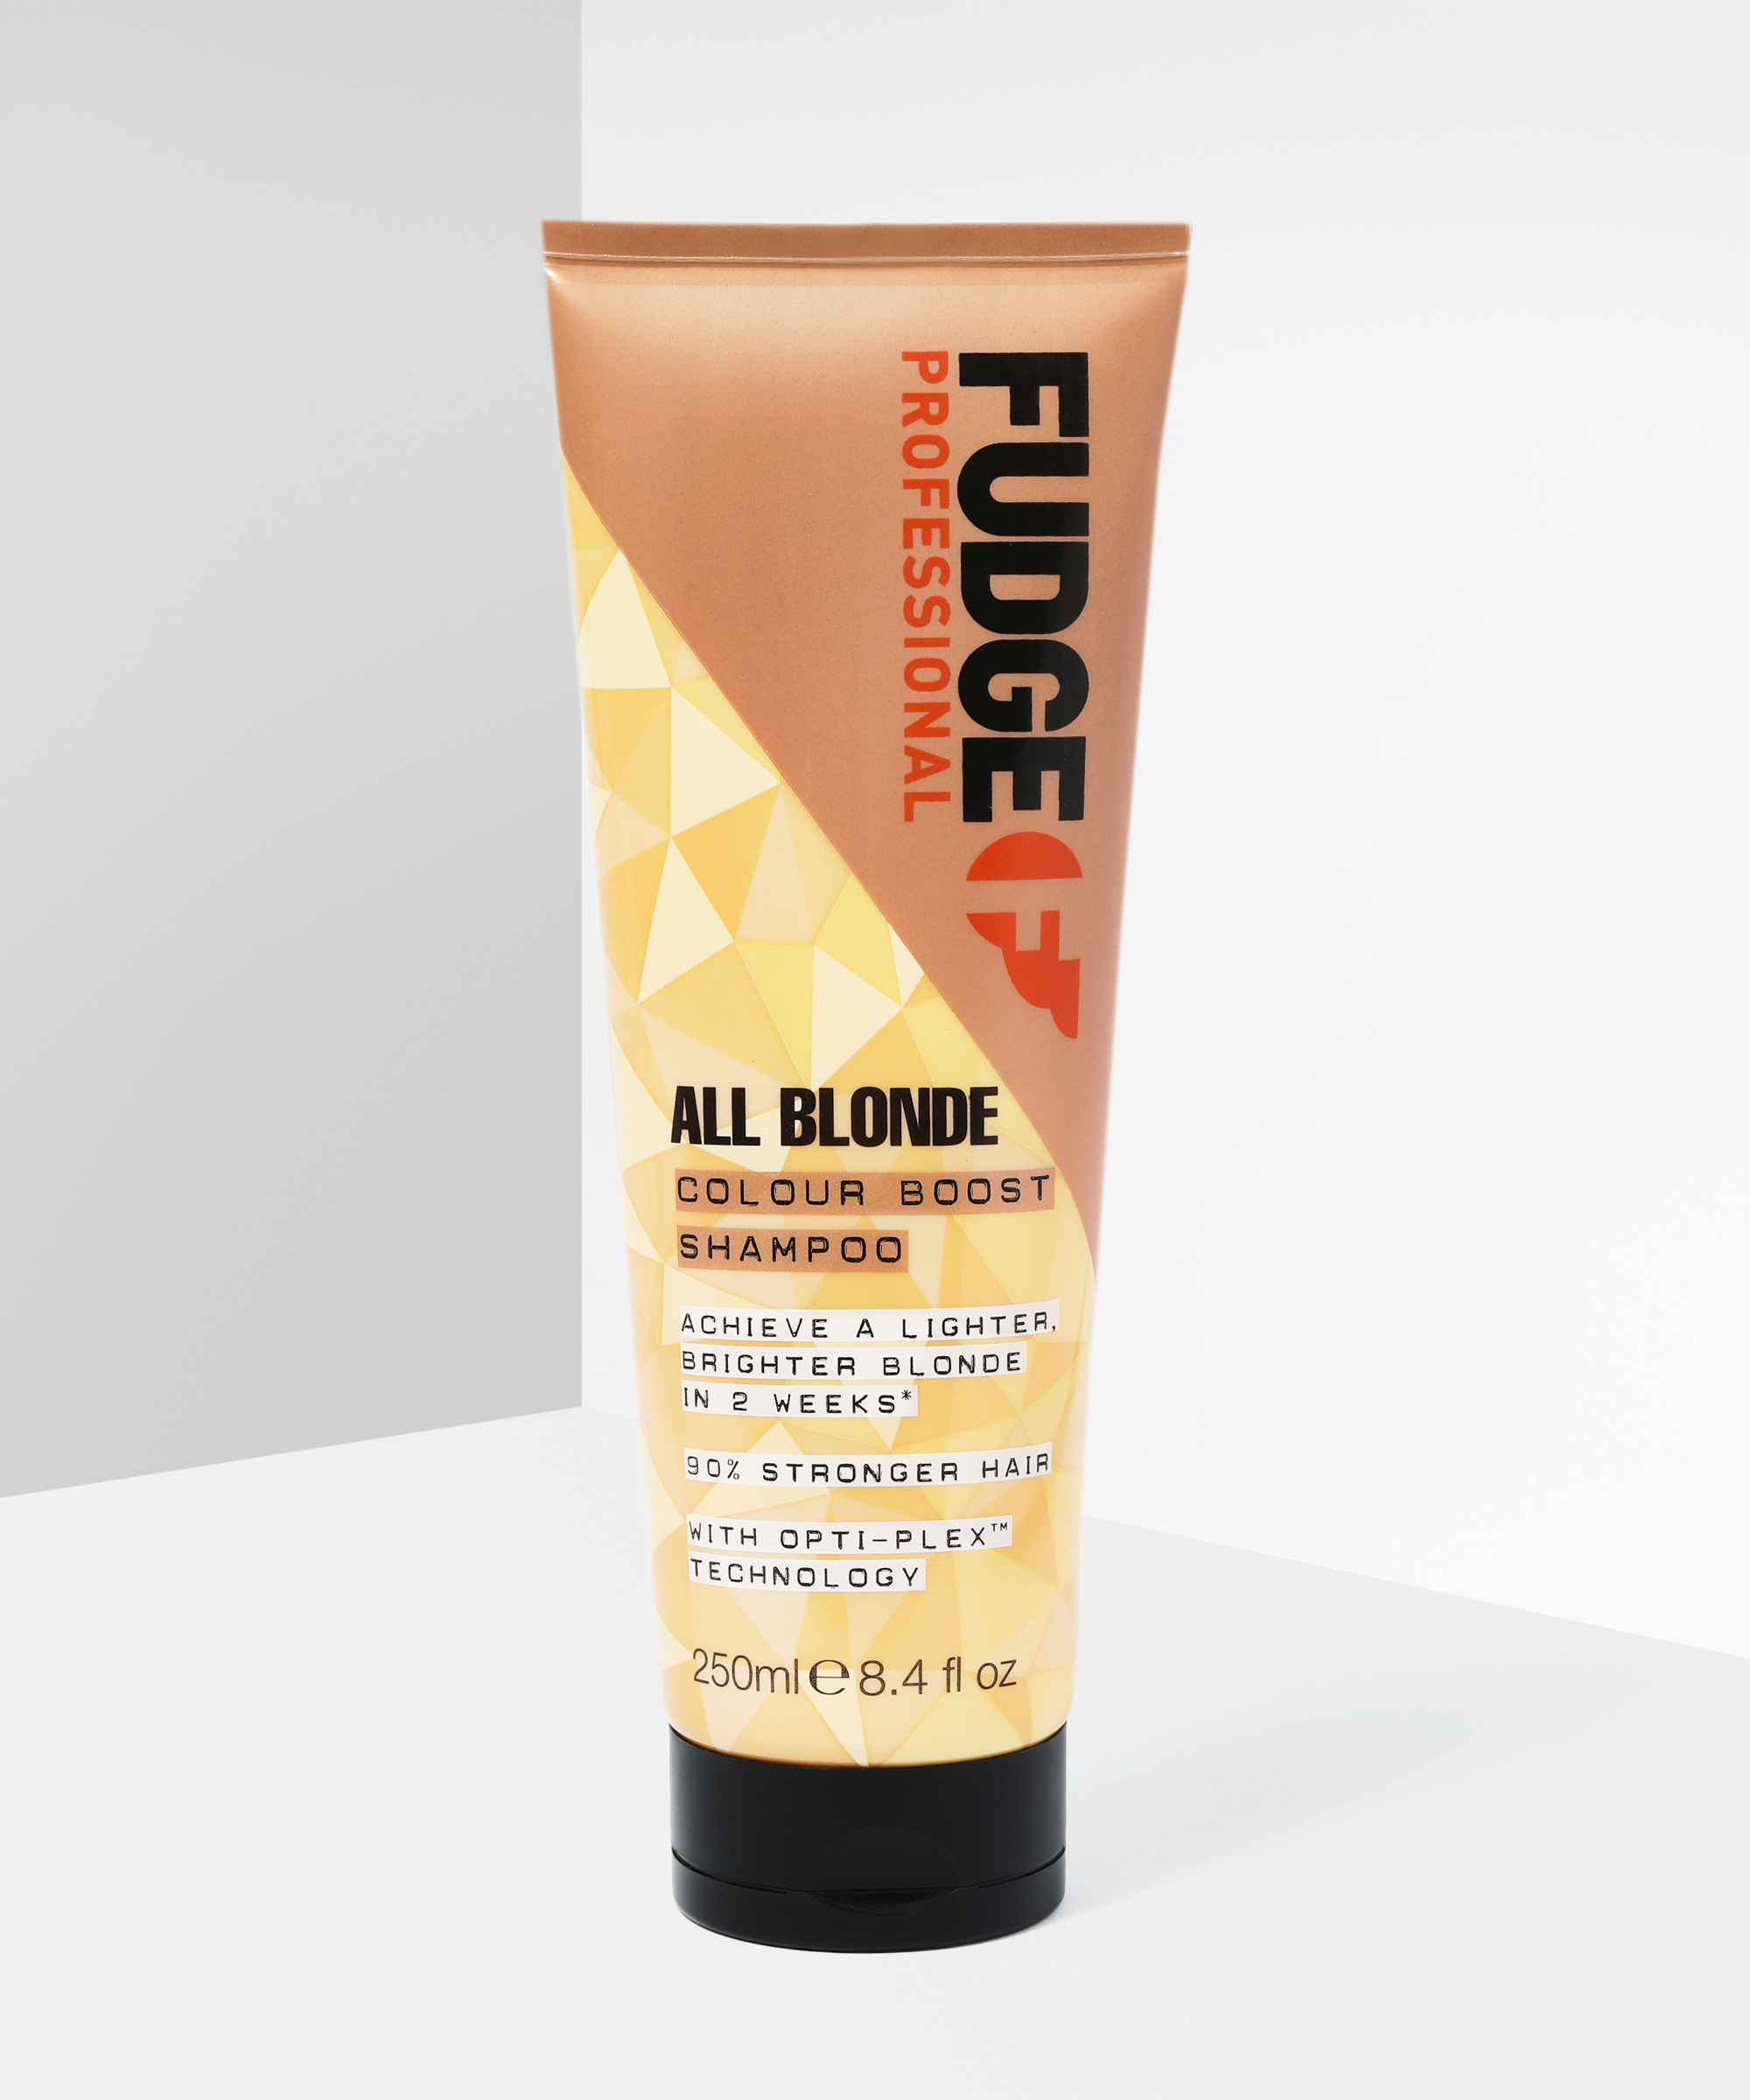 Fudge Professional All Blonde Booster at BAY Colour Shampoo BEAUTY